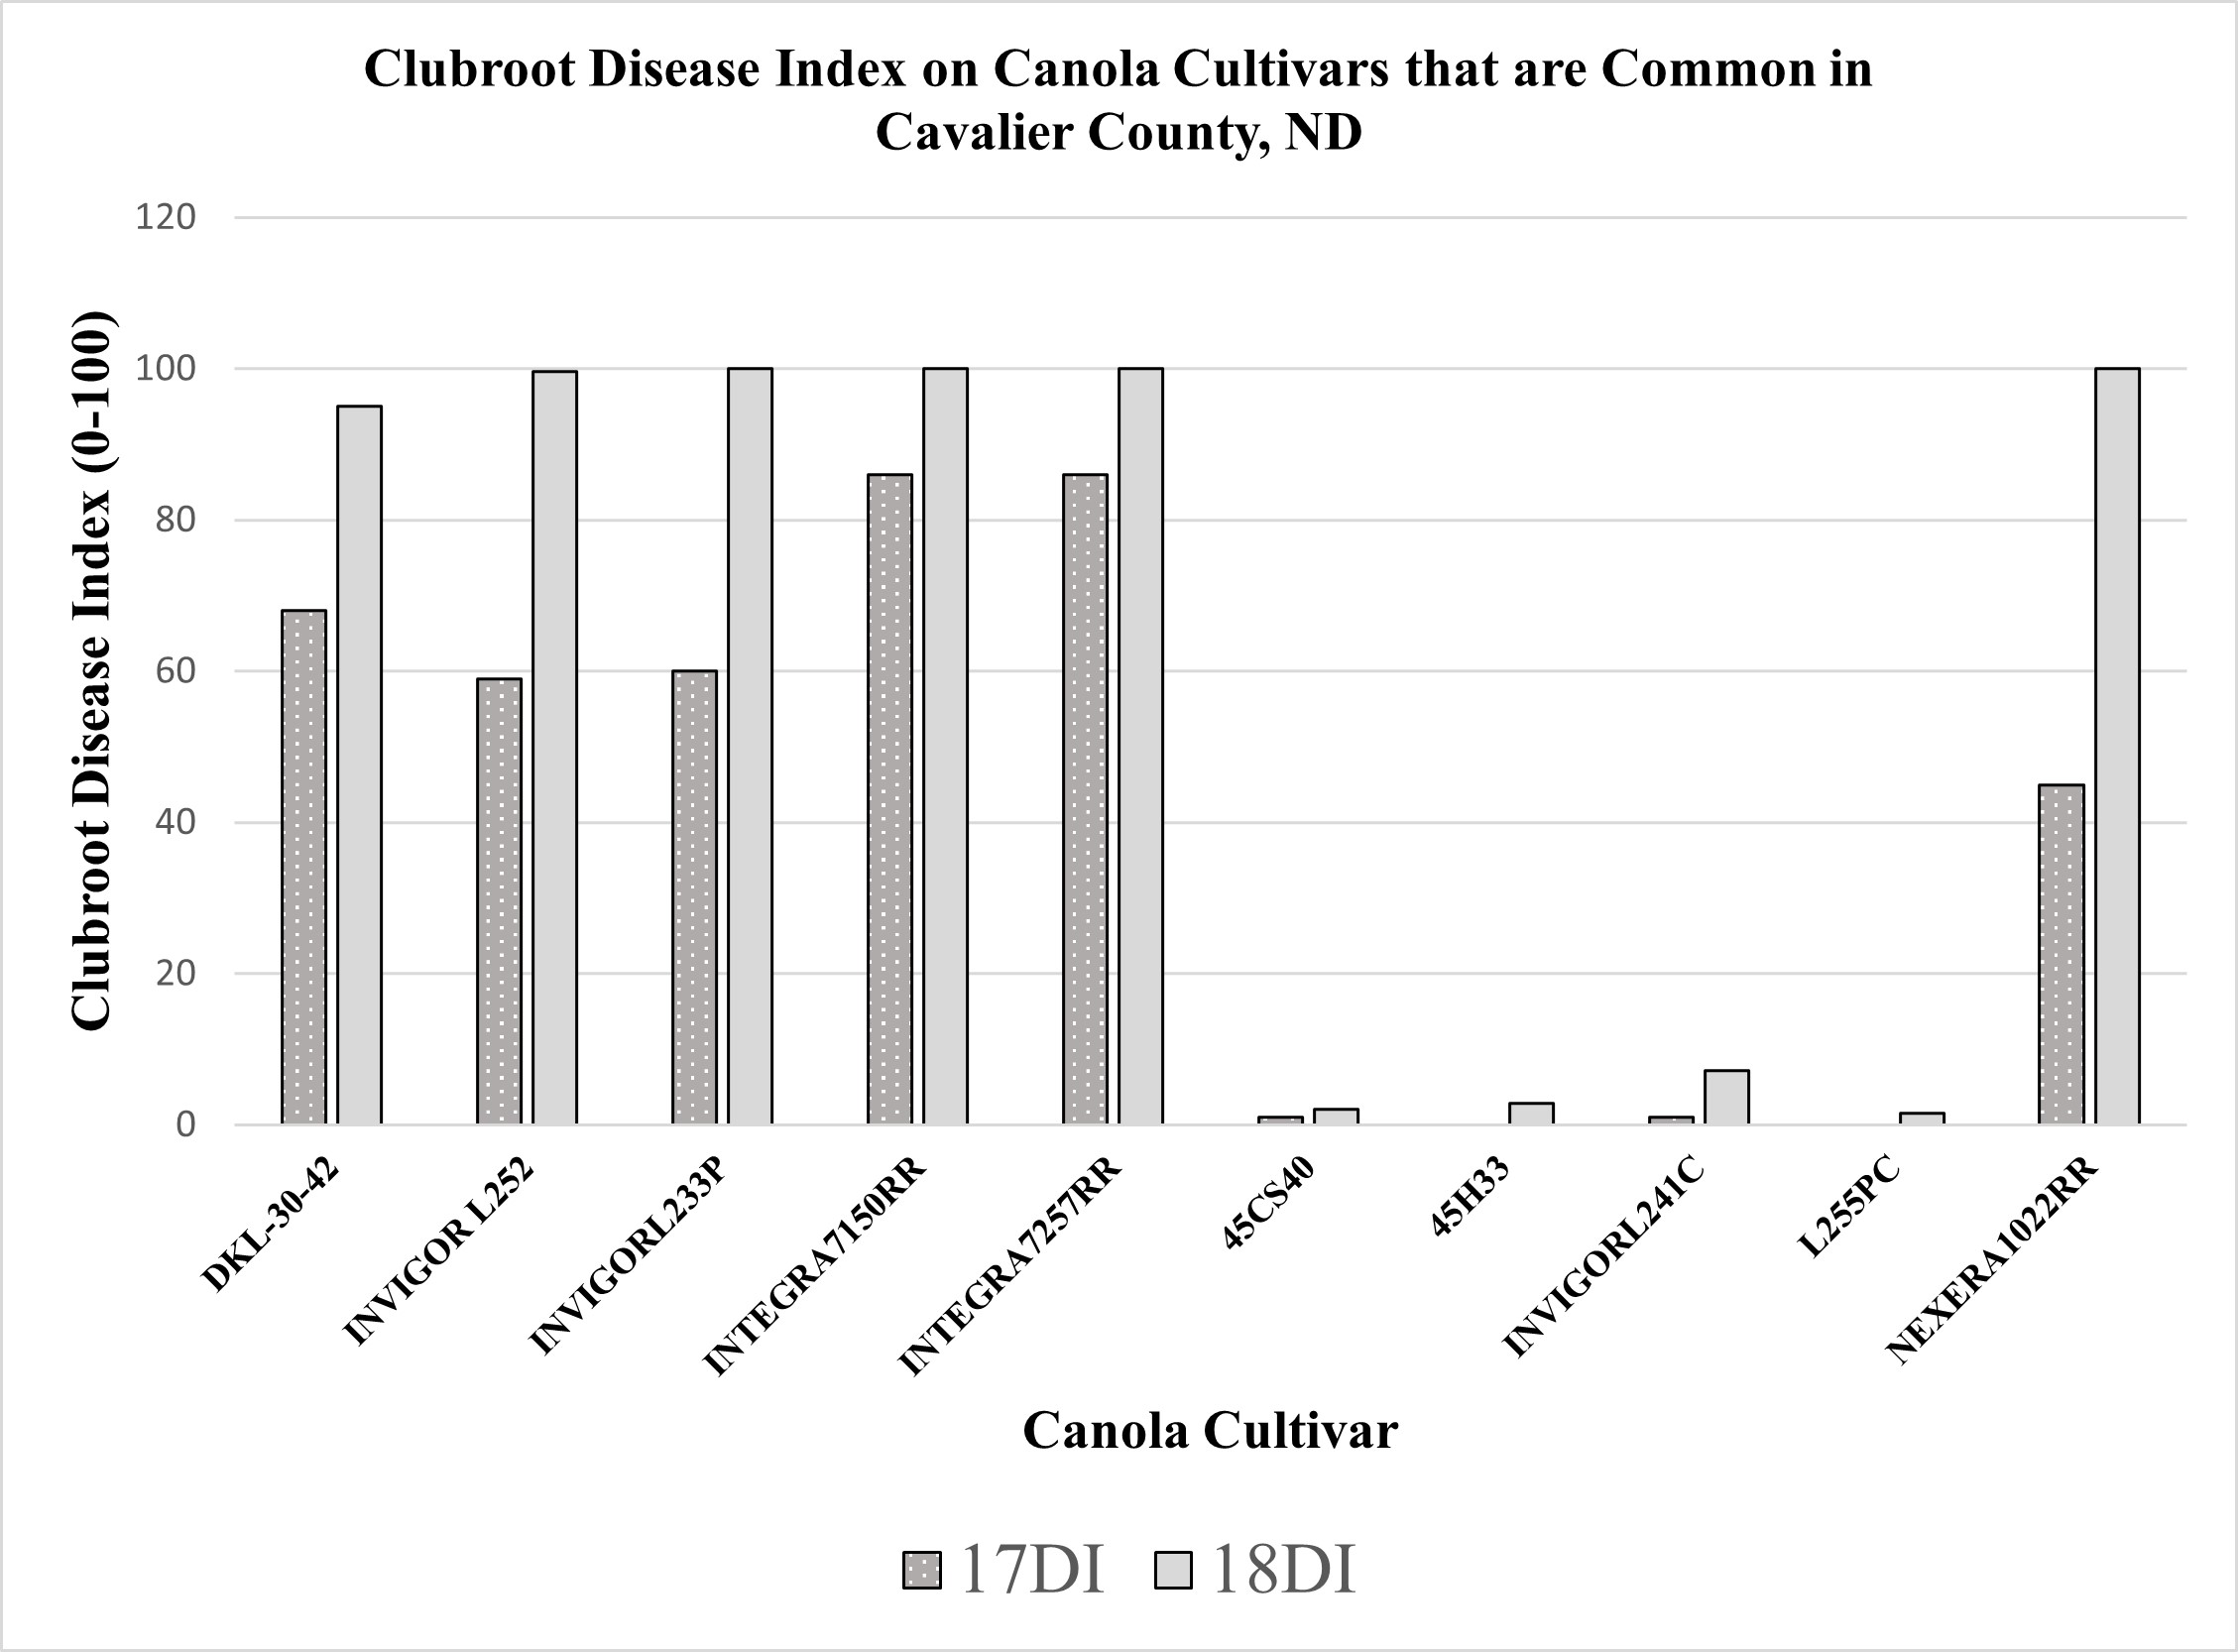 Mean clubroot incidence (%) on various commercial cultivars of canola.